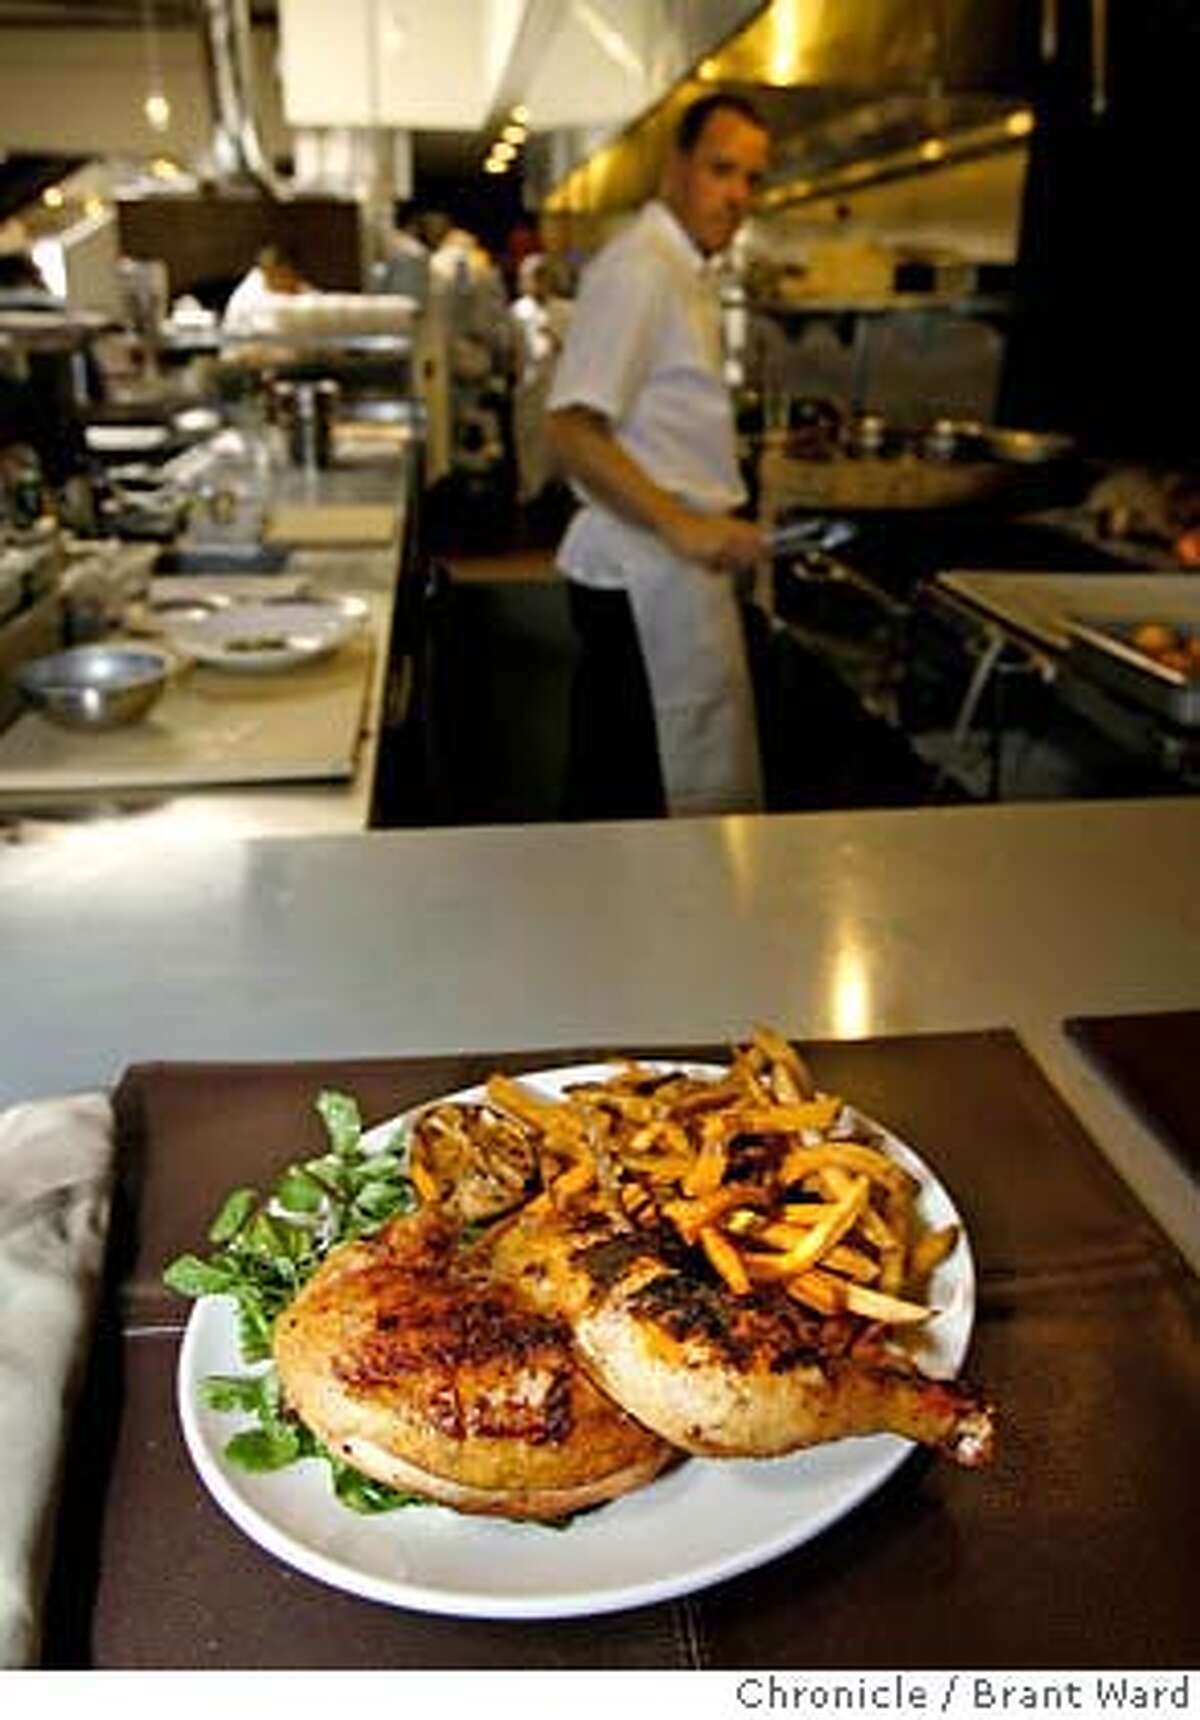 � d.27WESTCOUNTY043.JPG The famous jw's chicken and fries, a staple at West County Grill. West County Grill is one of the most impressive restaurant to open in this part of Sonoma County in about a decade. {Brant Ward/San Francisco Chronicle}5/8/07